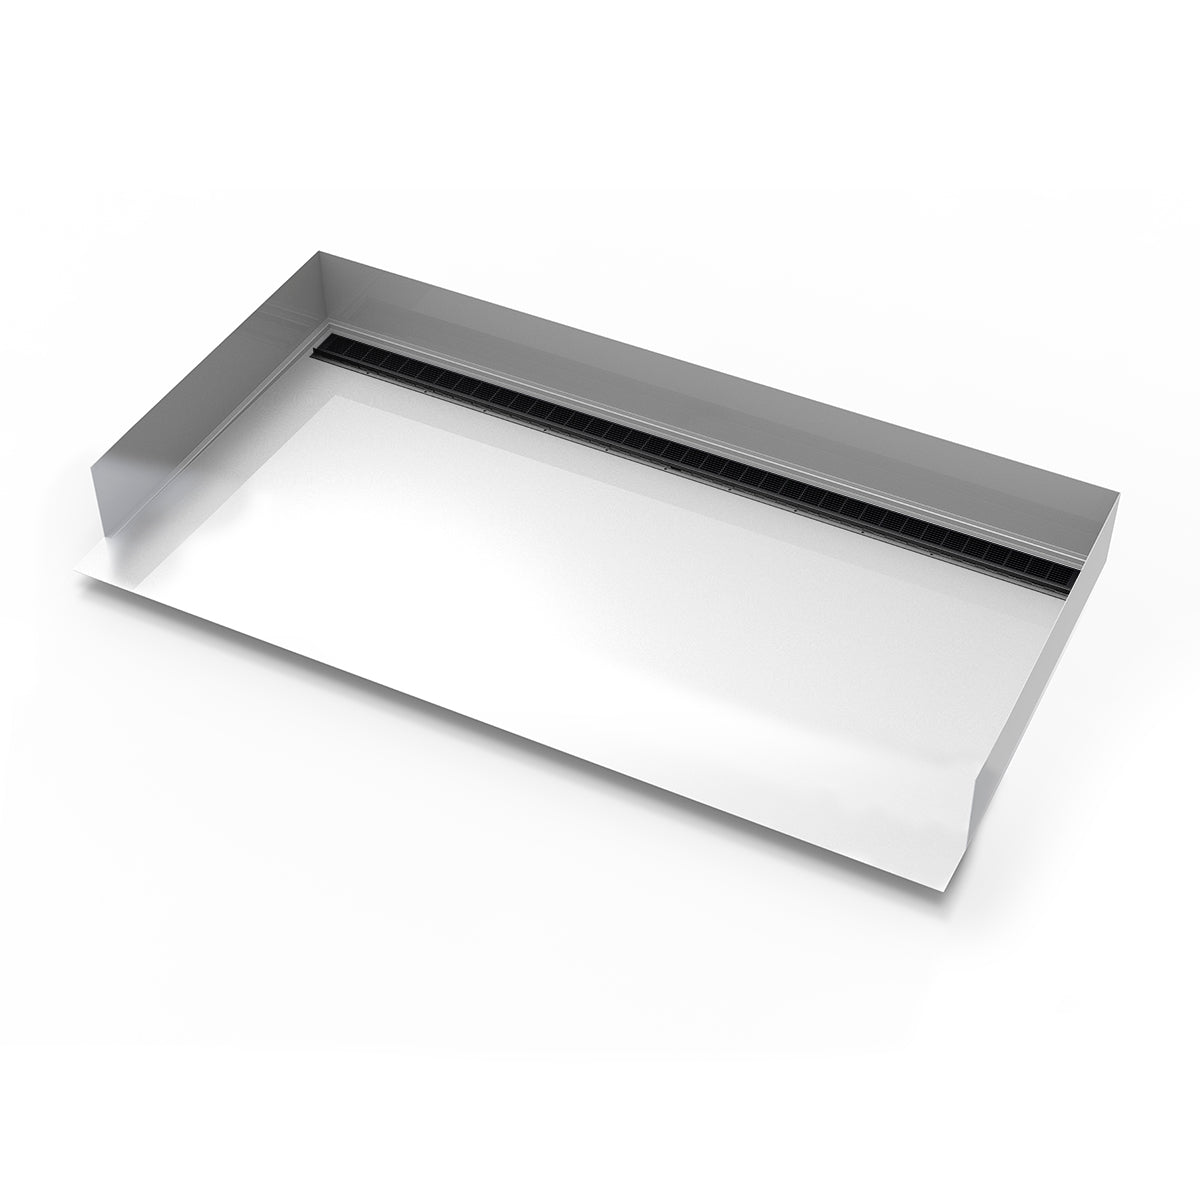 Infinity Drain 30"x 60" Curbless Stainless Steel Shower Base with Back Wall Slotted Pattern Linear Drain location